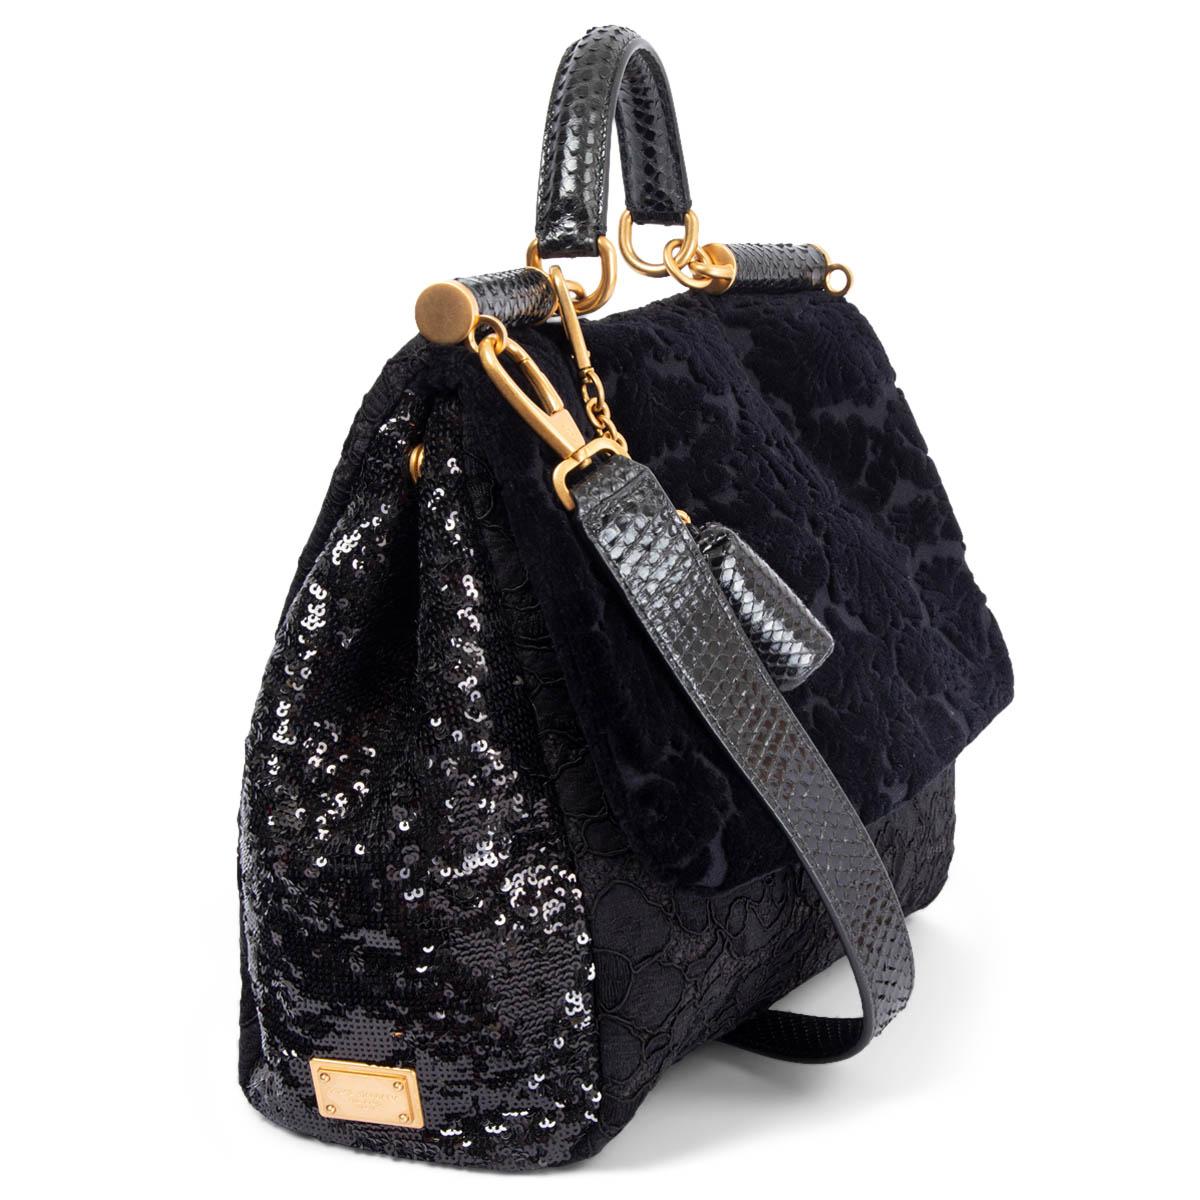 100% authentic Dolce & Gabbana Miss Sicily Large shoulder bag in black lace with devoree velvet flap and sequin gussets featuring gold-tone hardware. Opens with a flap to the signature leopard print canvas lining with one zip pocket against the back